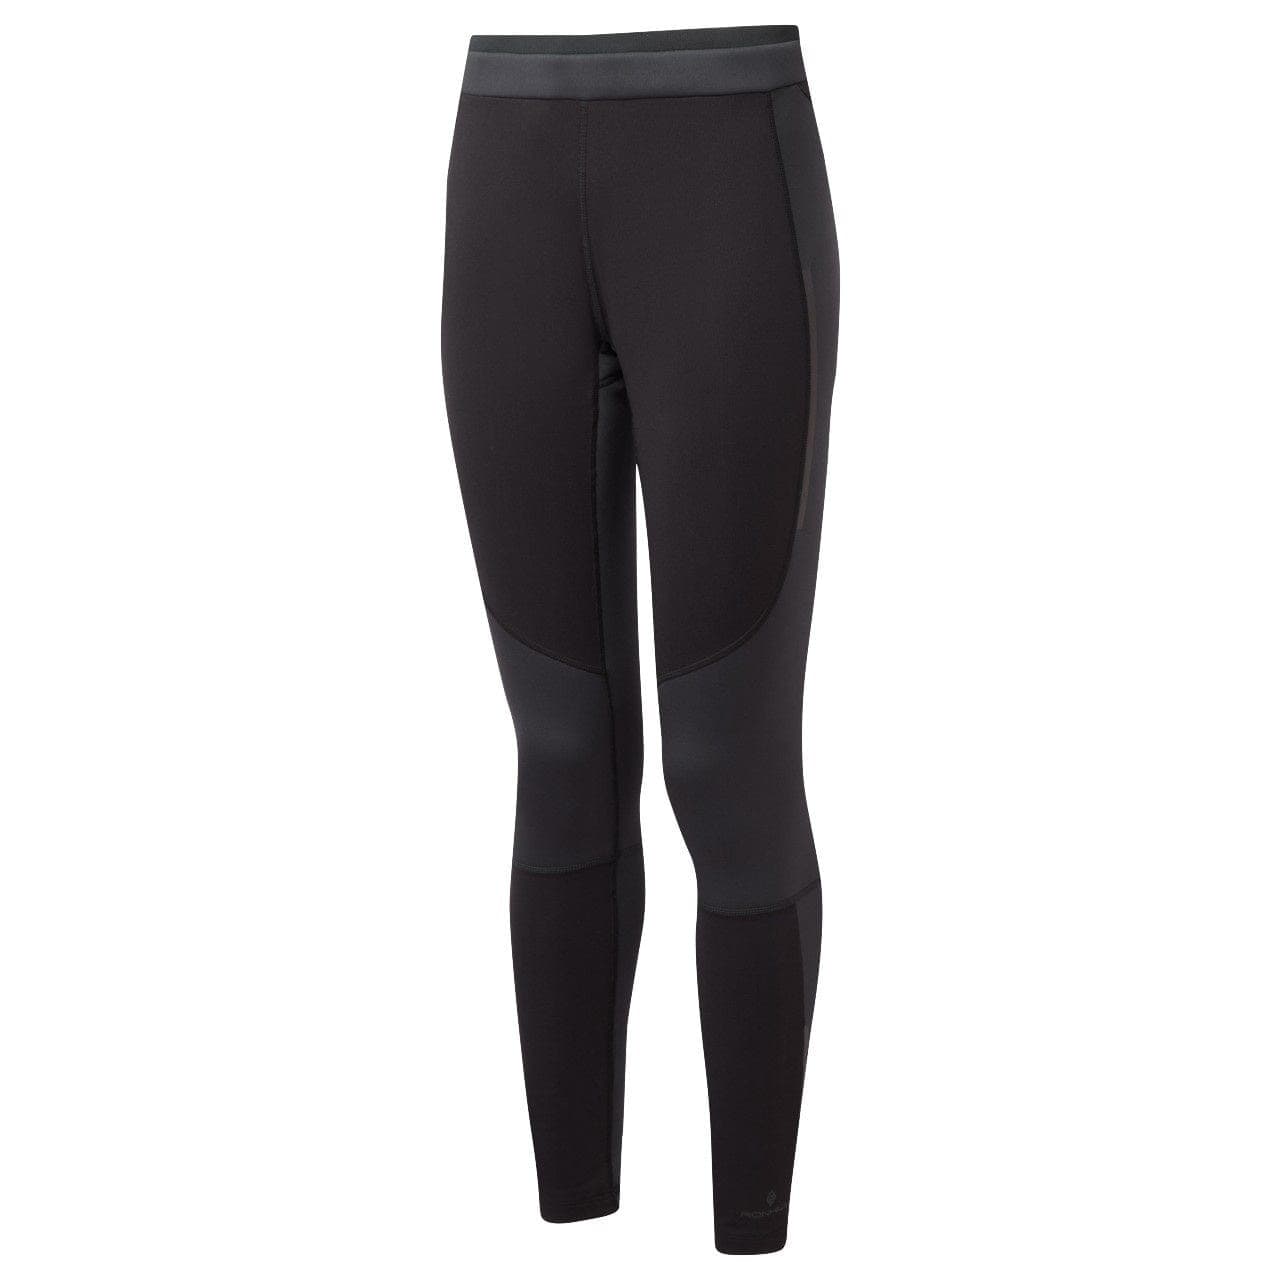  Ron Hill Women's Stride Stretch Tights, Black/Peacock